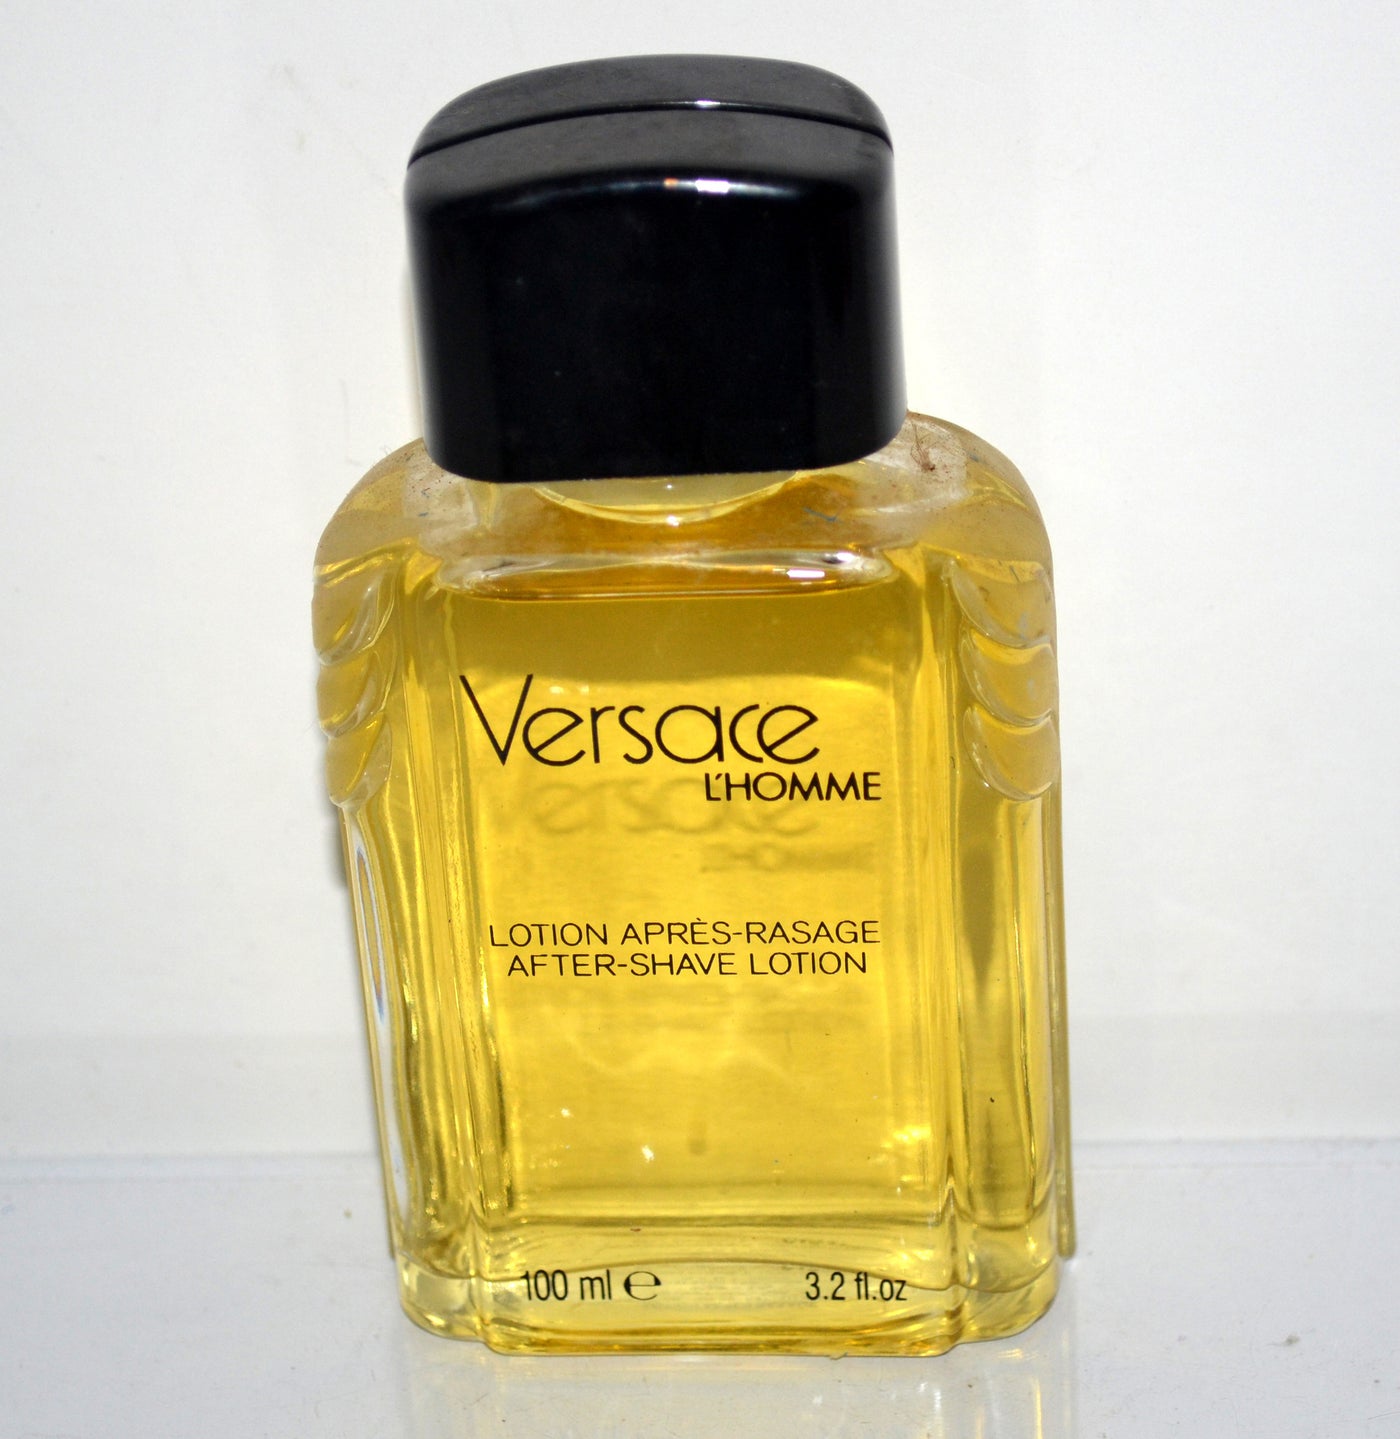 Versace L'Homme After Shave Lotion